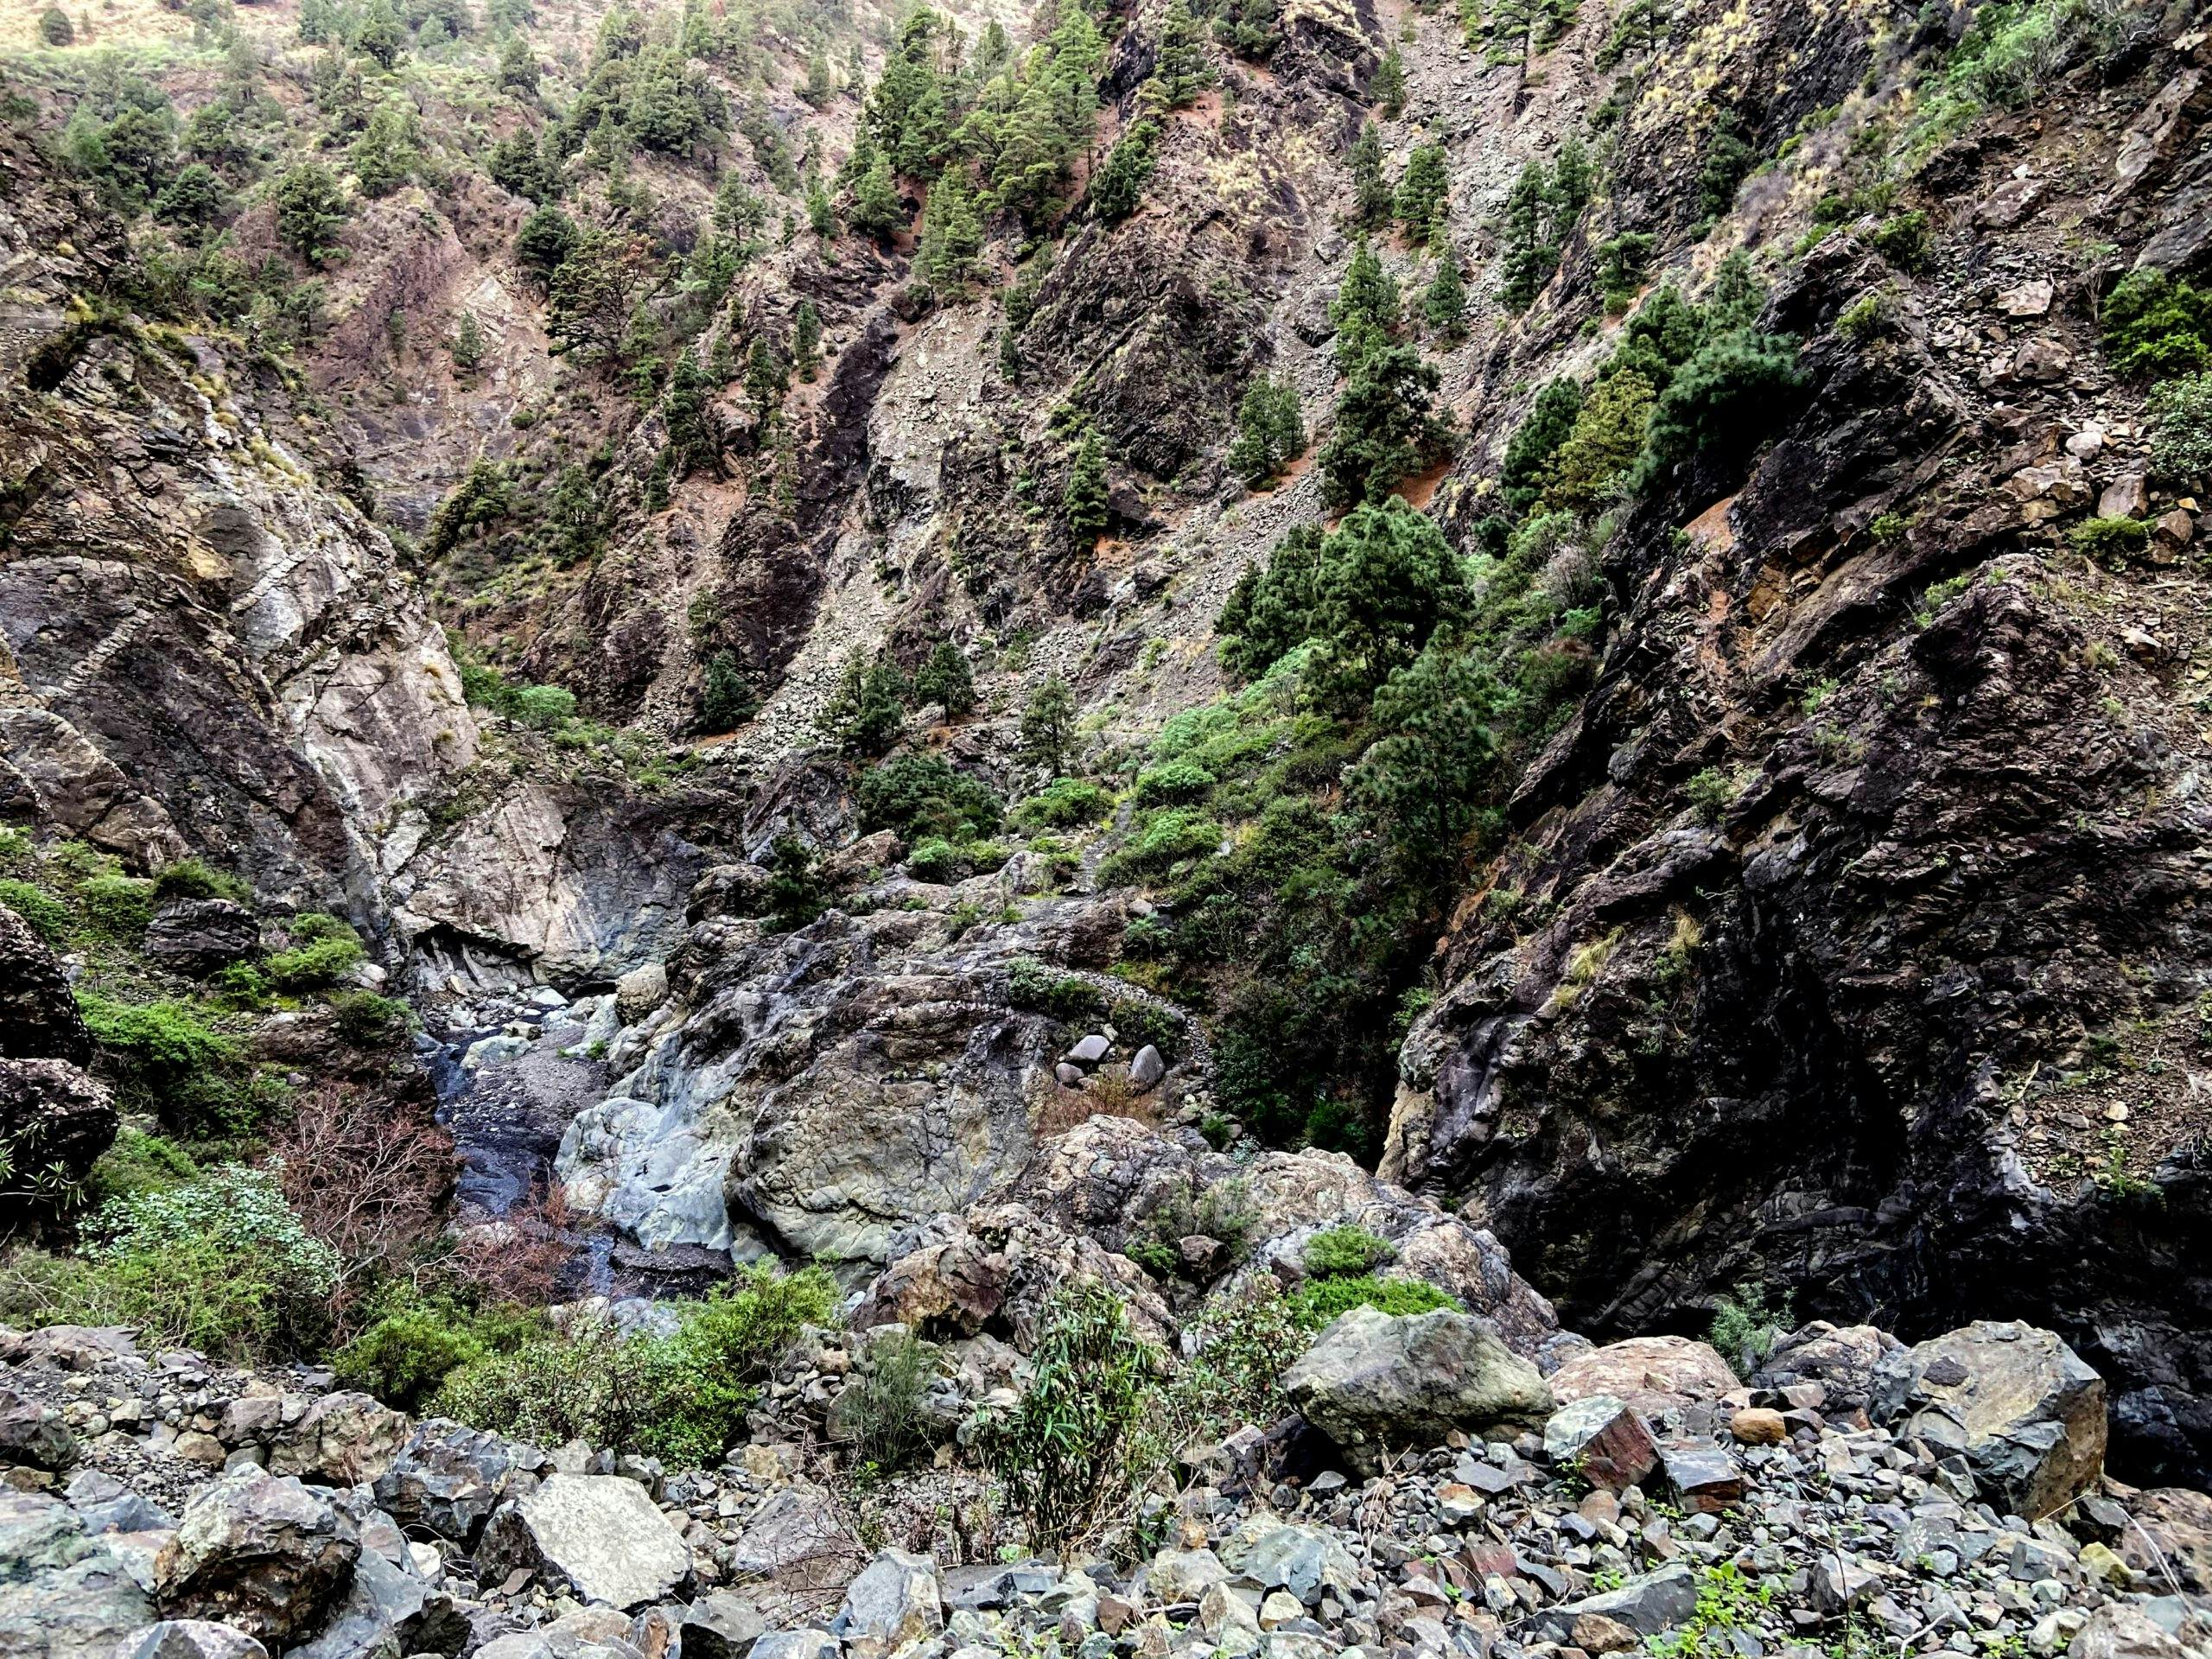 Hiking along the edge of the Barranco de Angustias with magnificent low views